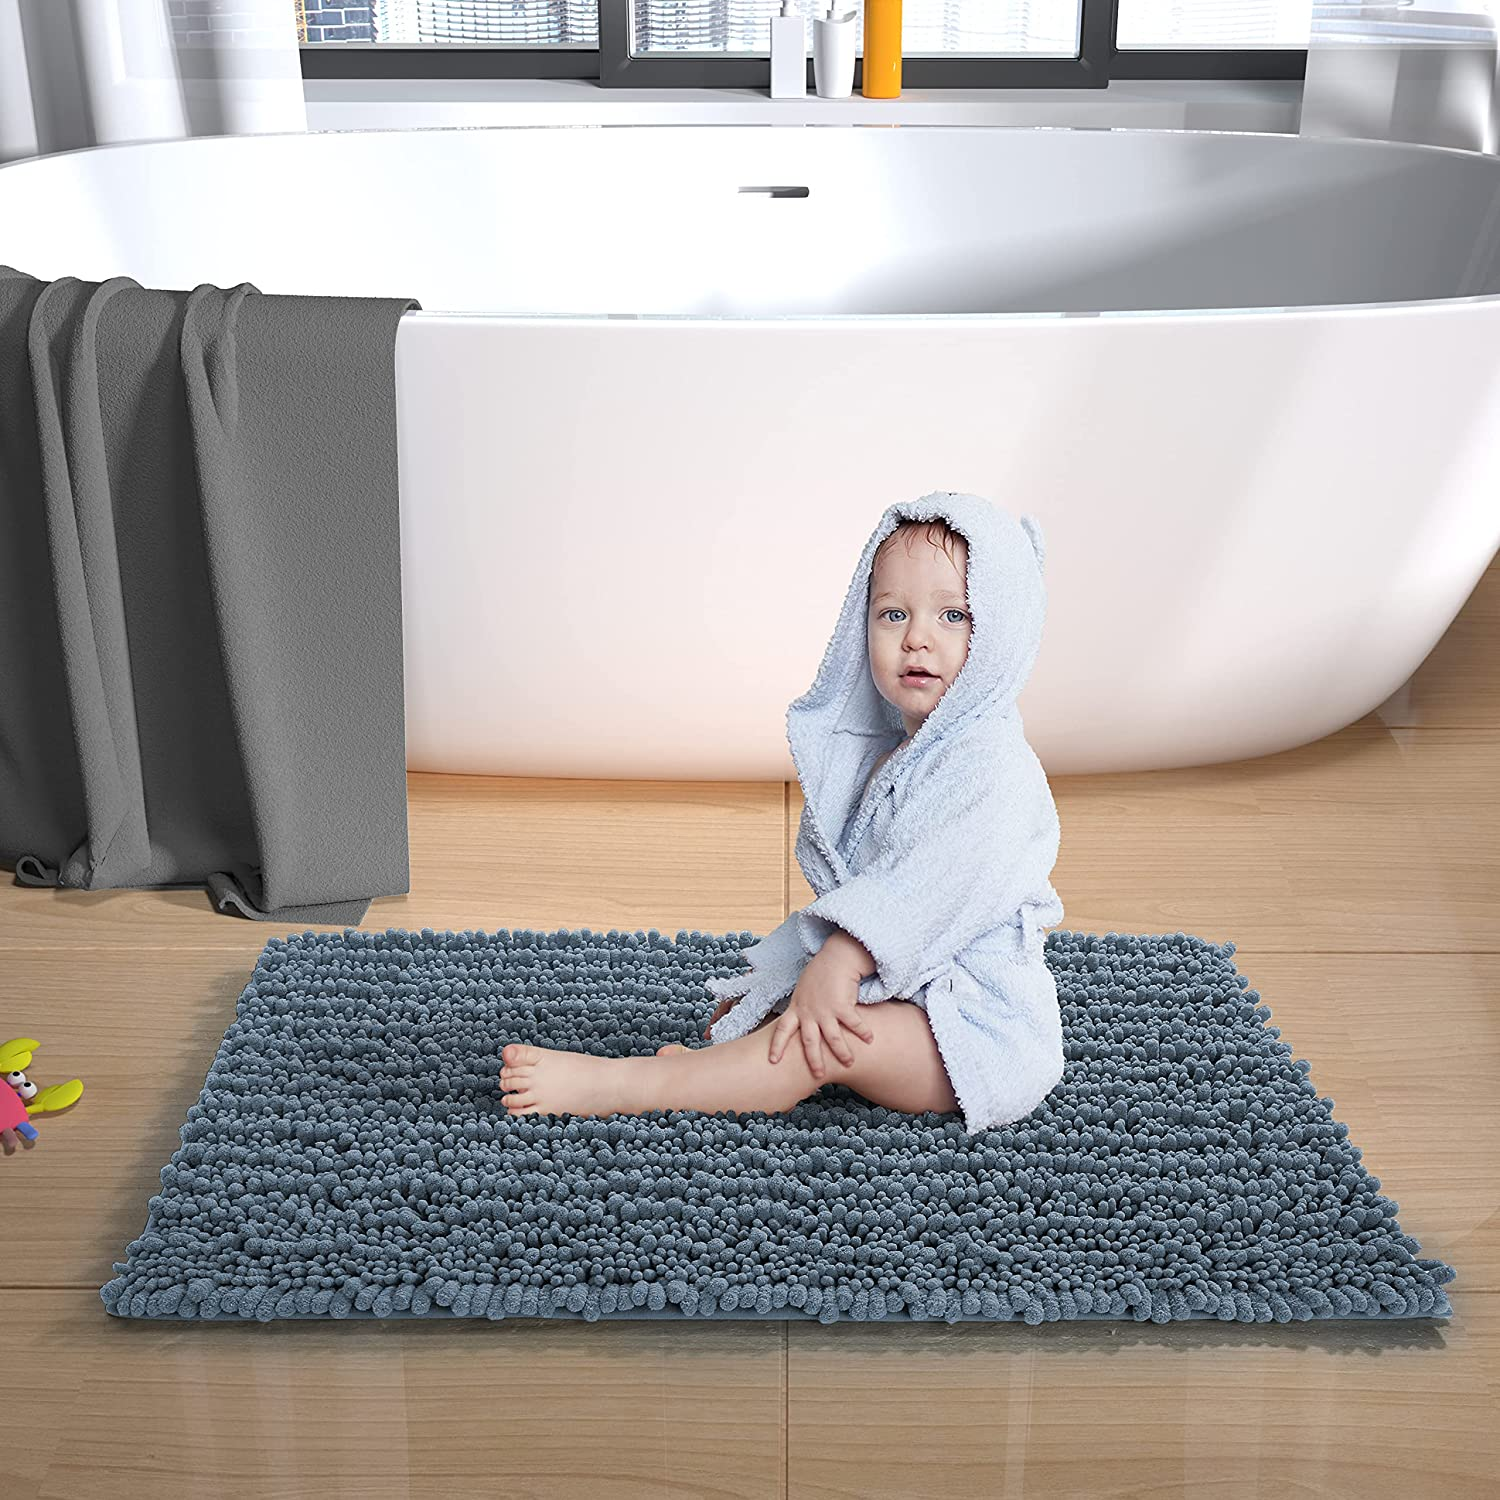  Original Luxury Chenille Bath Mat, 55.1 X 24 Inches, Soft Shaggy and Comfortable, Large Size, Super Absorbent and Thick, Non-Slip, Machine Washable, Perfect for Bathroom, Aquamarine